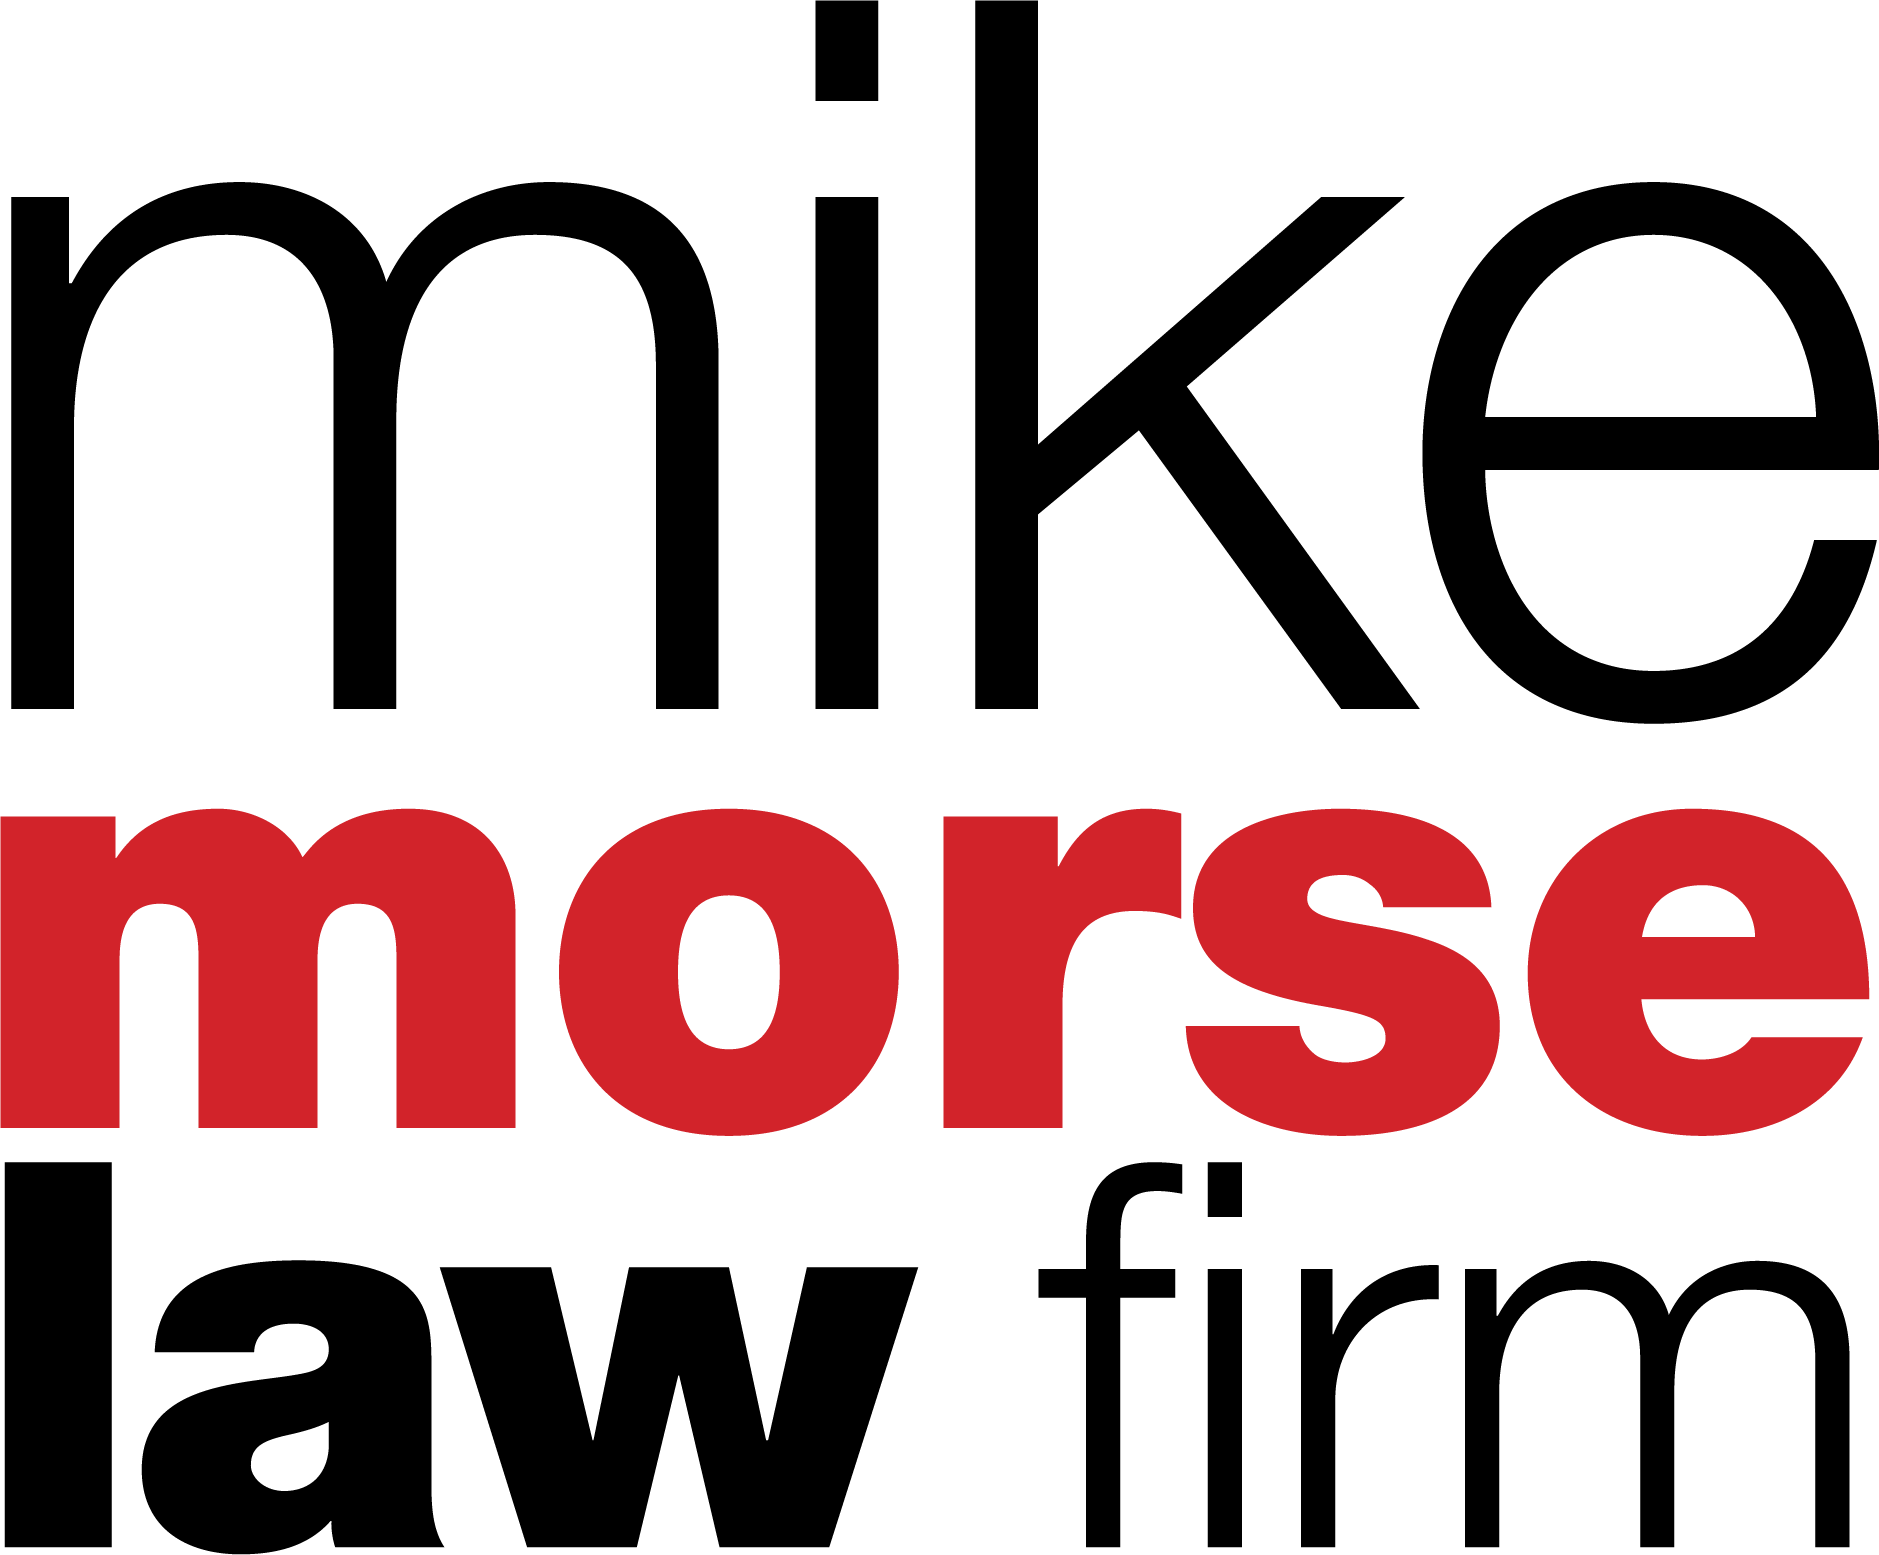 Mike Morse law firm logo